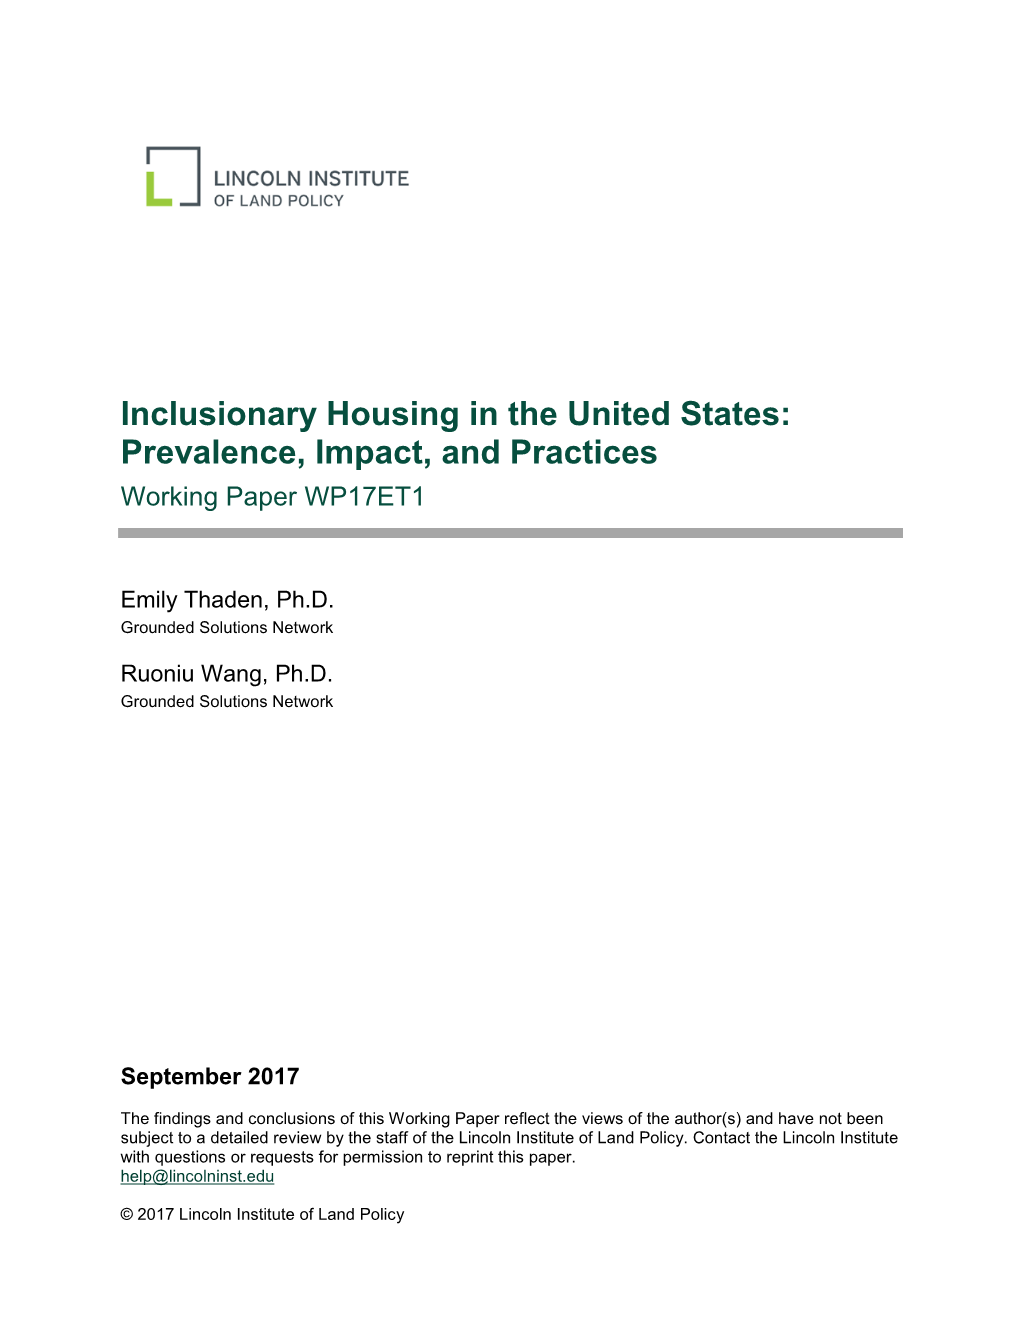 Inclusionary Housing in the United States: Prevalence, Impact, and Practices Working Paper WP17ET1